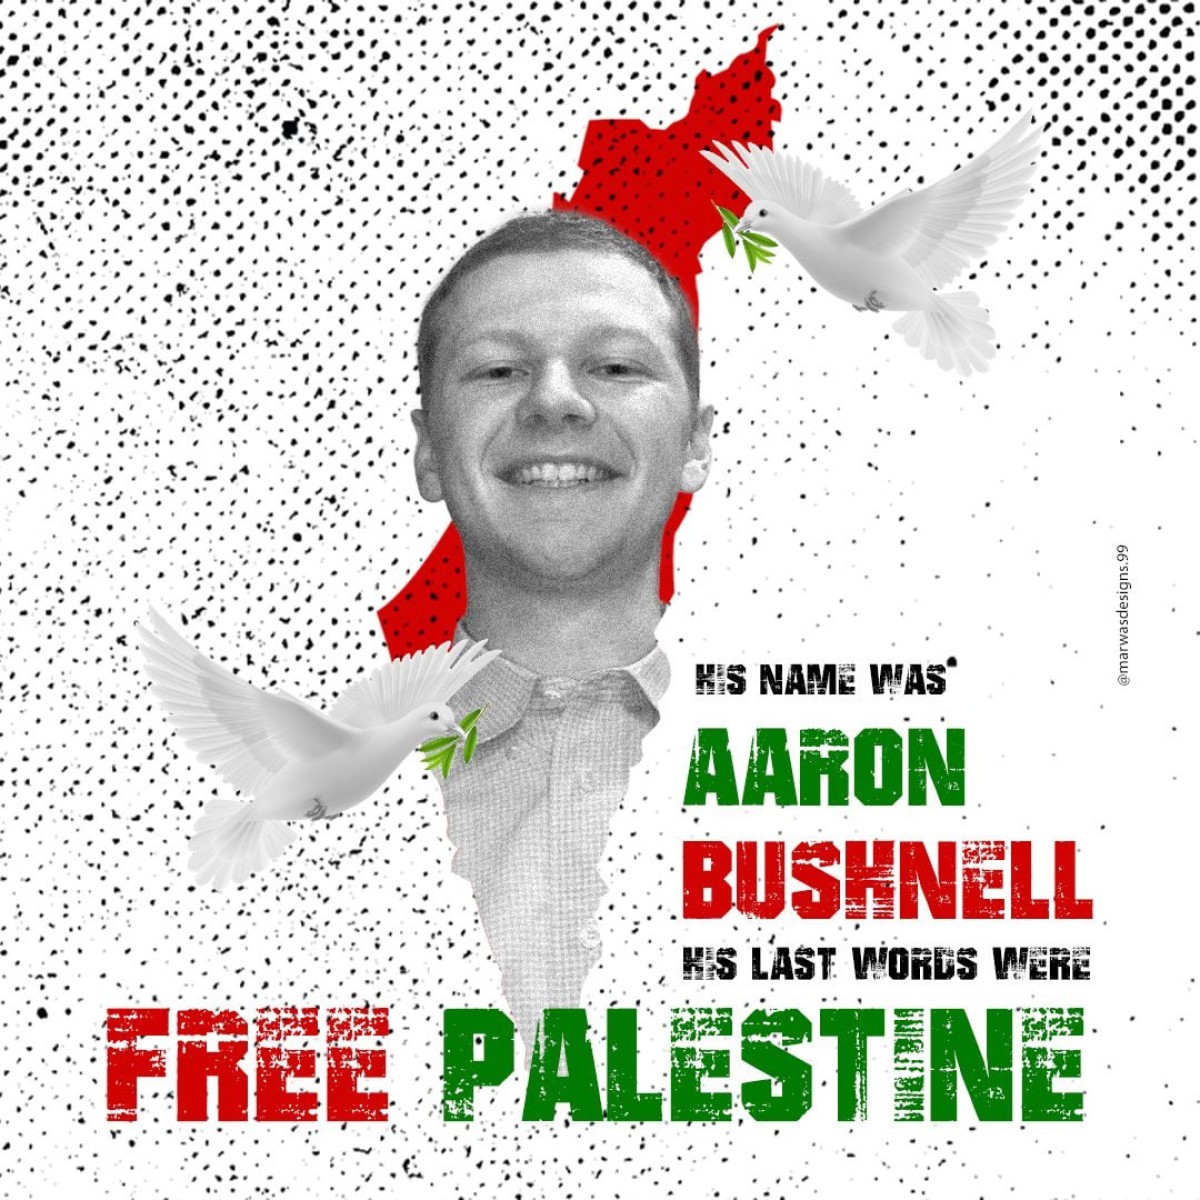 HIS NAME WAS AARON BUSHNELL HIS LAST WORDS WERE FREE PALESTINE